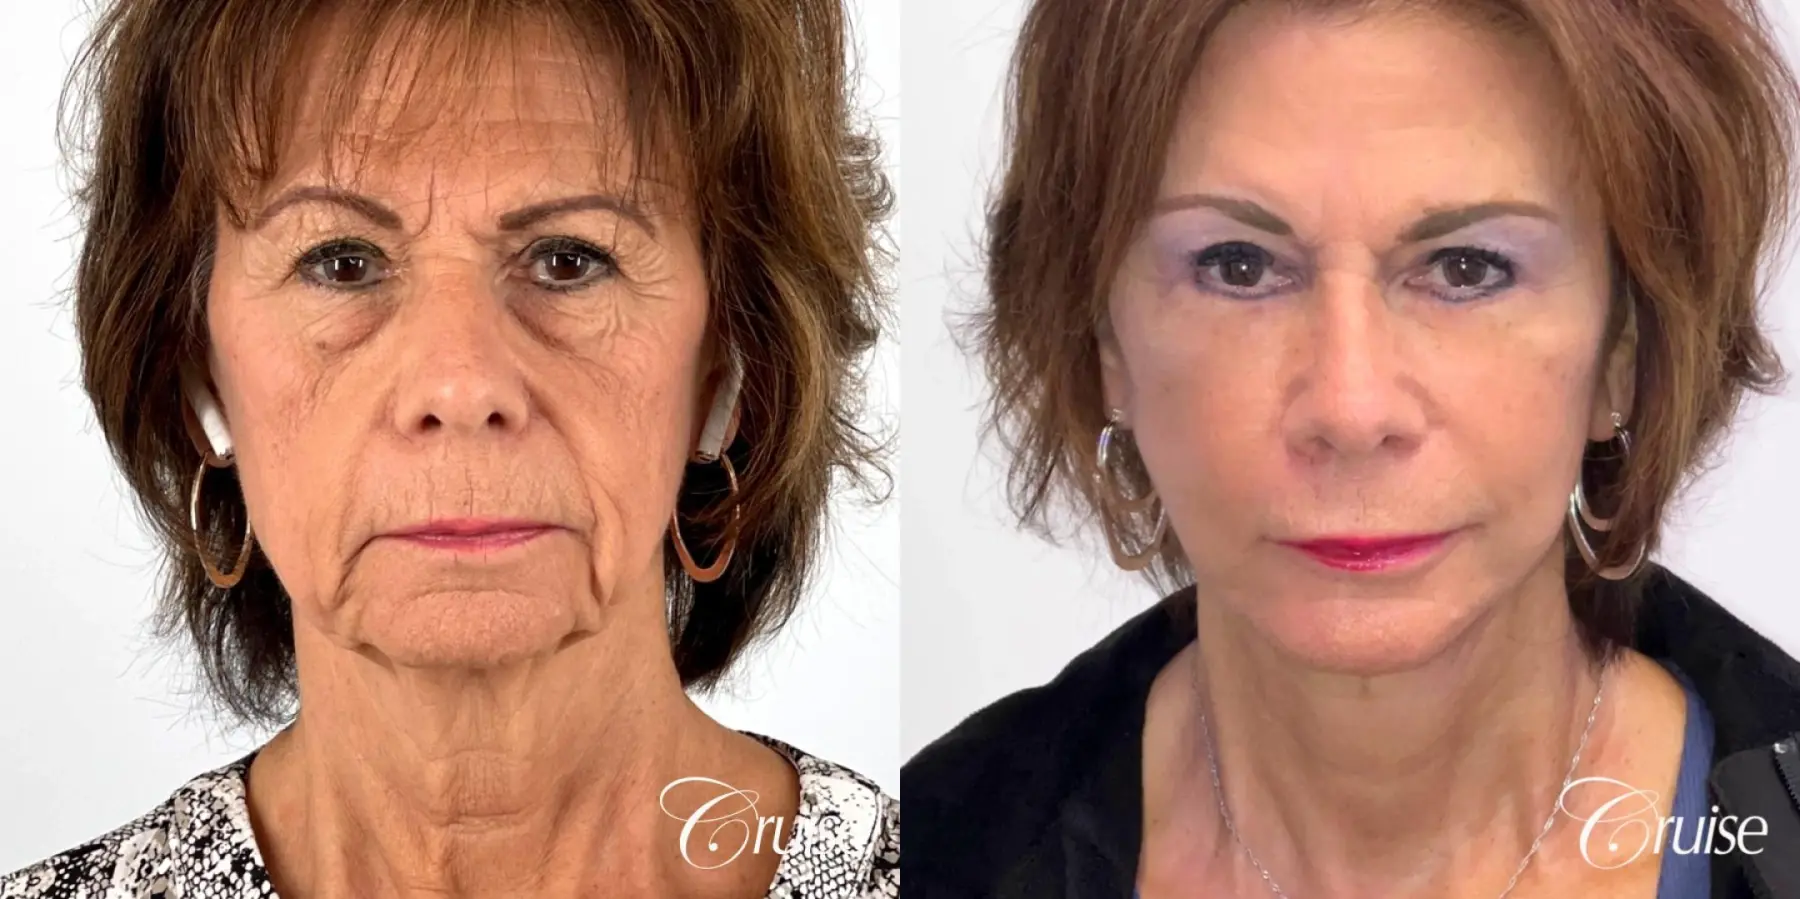 Face & Neck Lift & Rejuvenation - Before and After 1